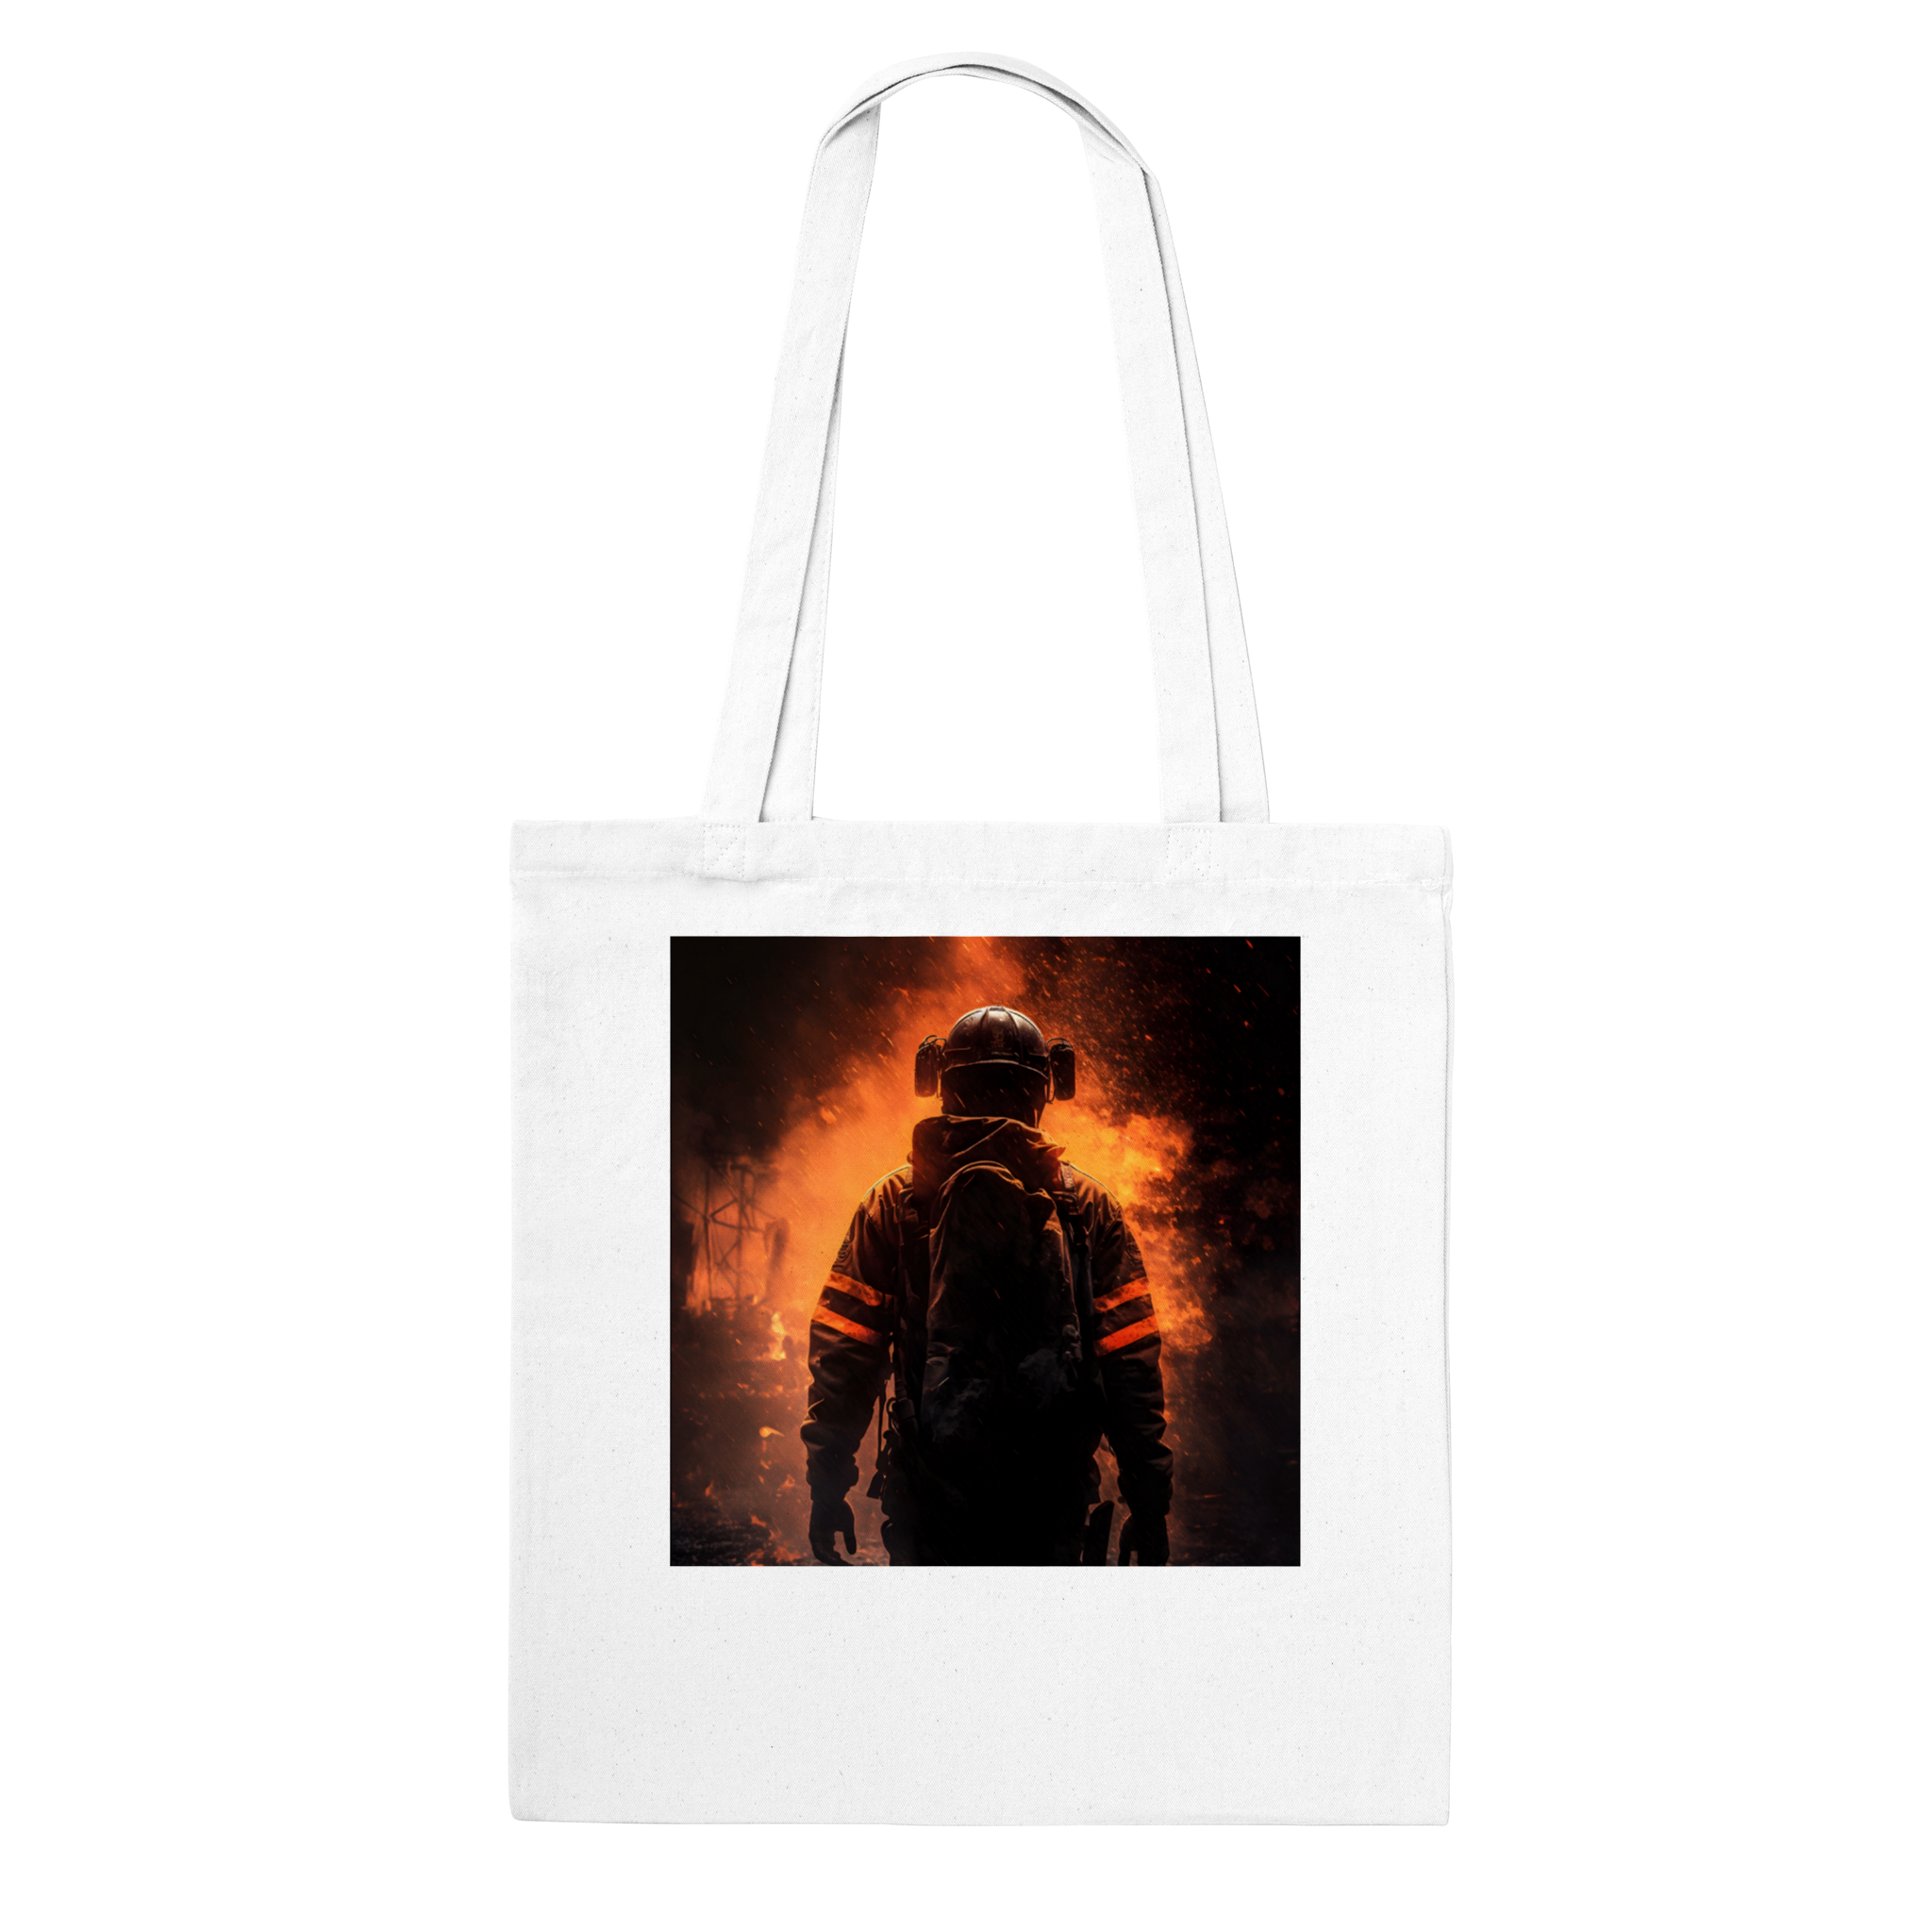 Tote bag "Firefighter in the flames"